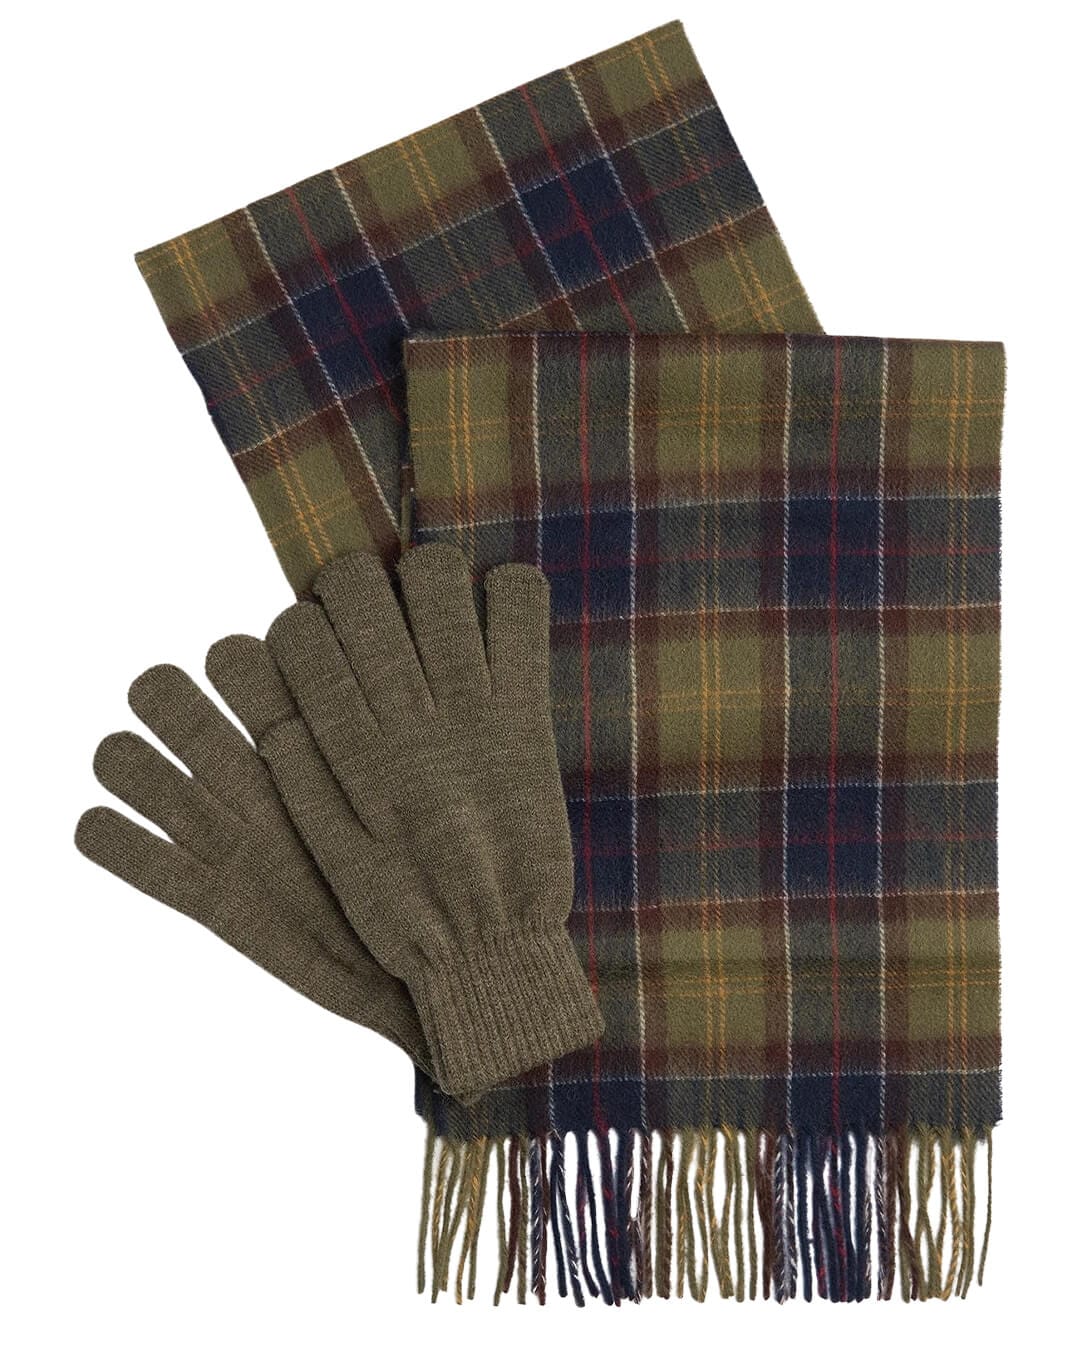 Barbour Gloves ONE Barbour Tartan Green Scarf And Glove Gift Set